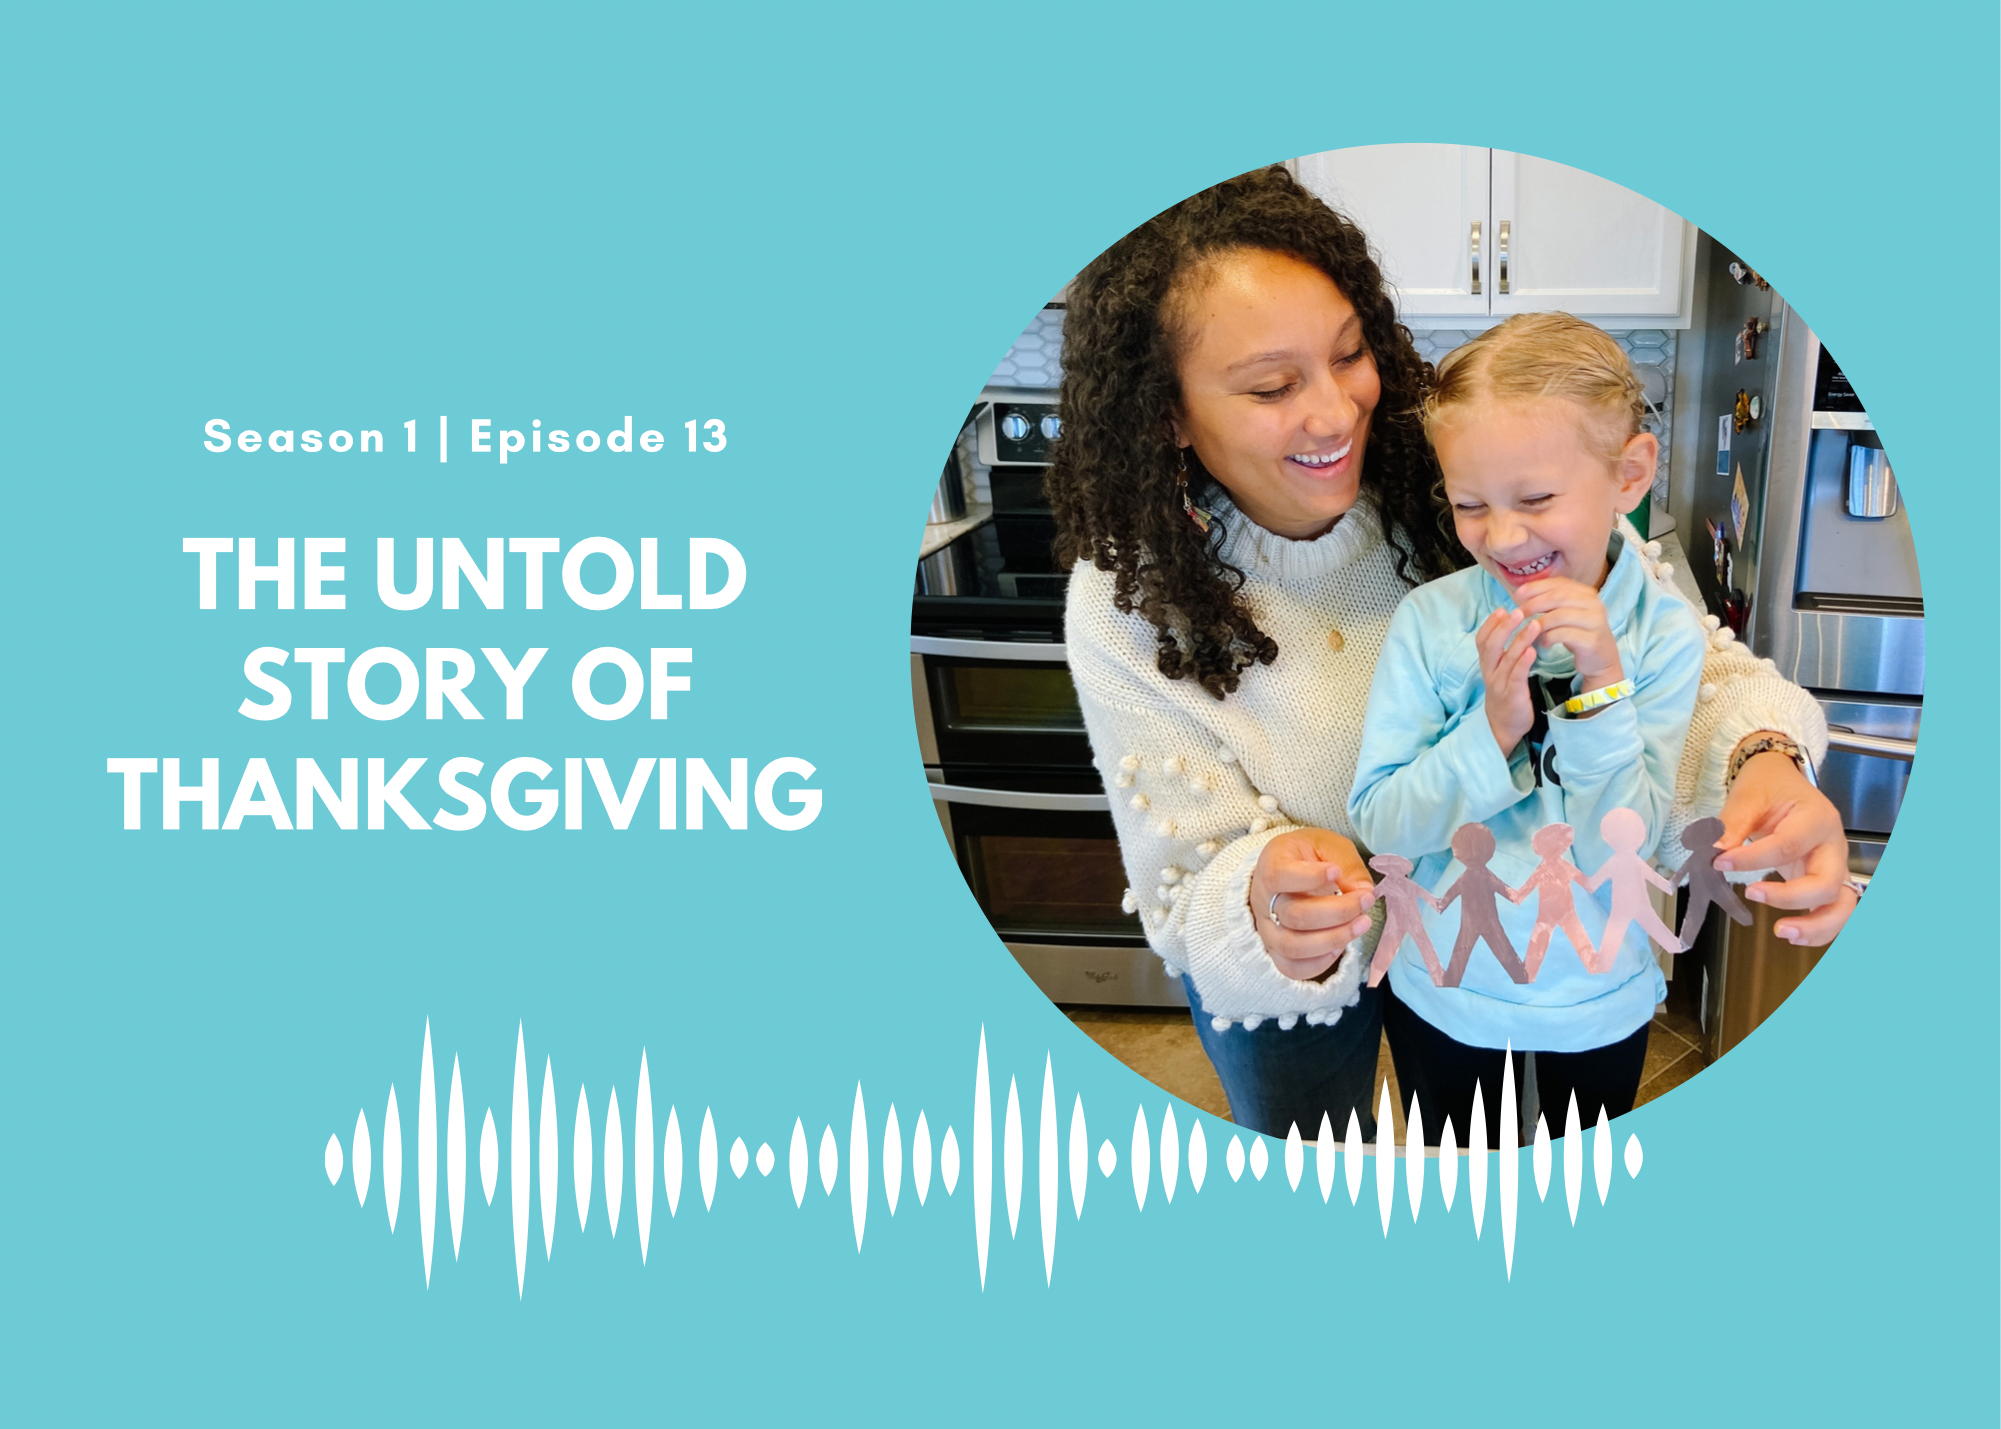 The Untold Story of Thanksgiving